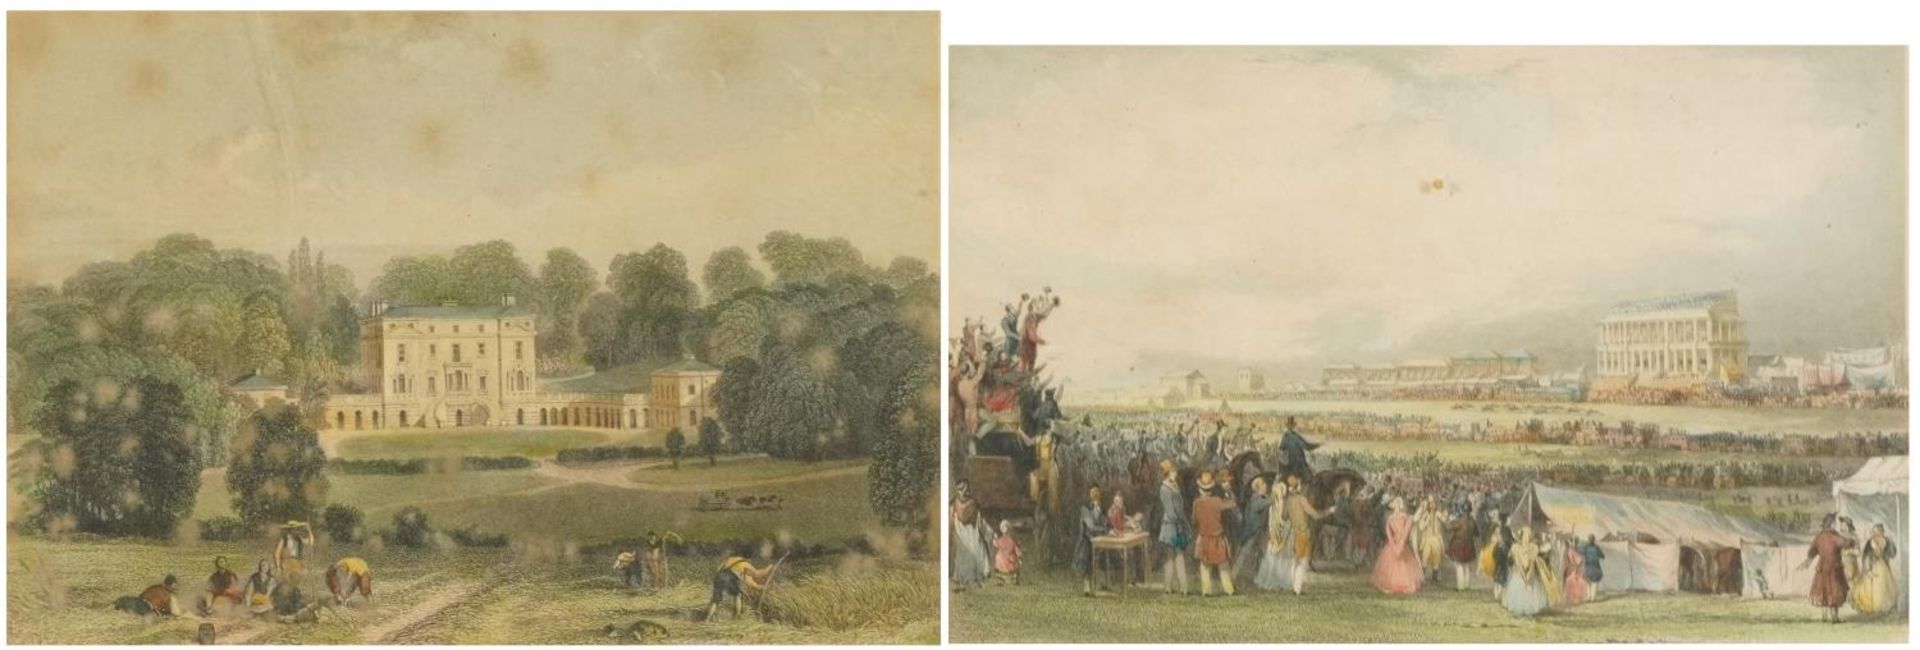 Epsom Races on Derby Day and Woodcote Park, two 19th century engravings, one after Thomas Allom